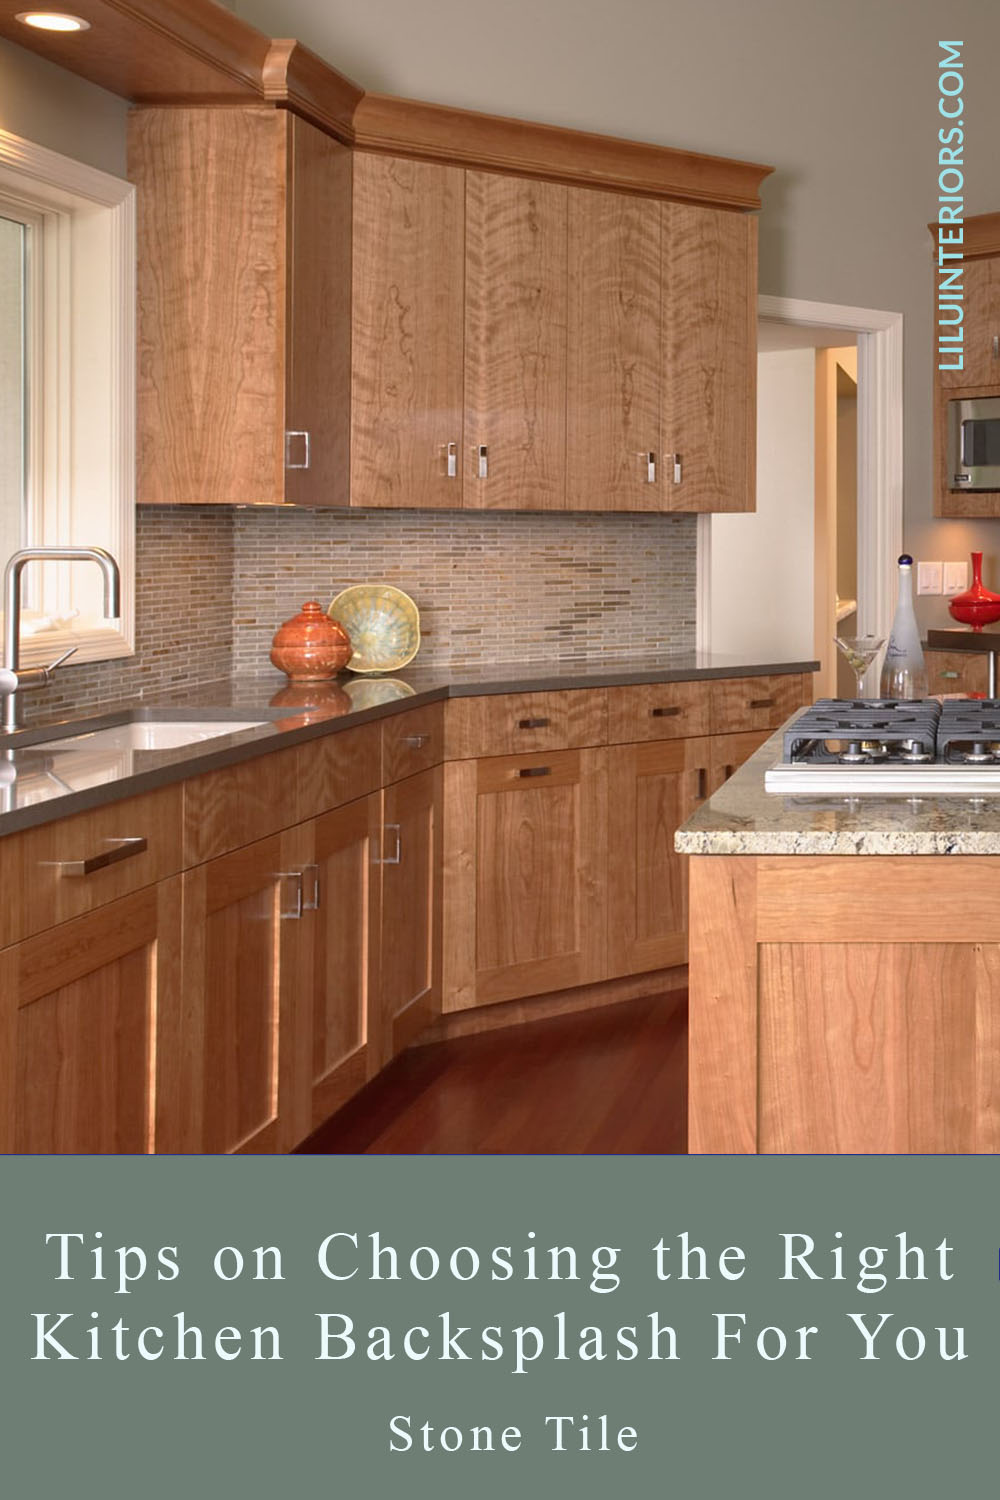 Tips On Choosing The Best Kitchen Backsplash For You According To Lilu Lilu Interiors